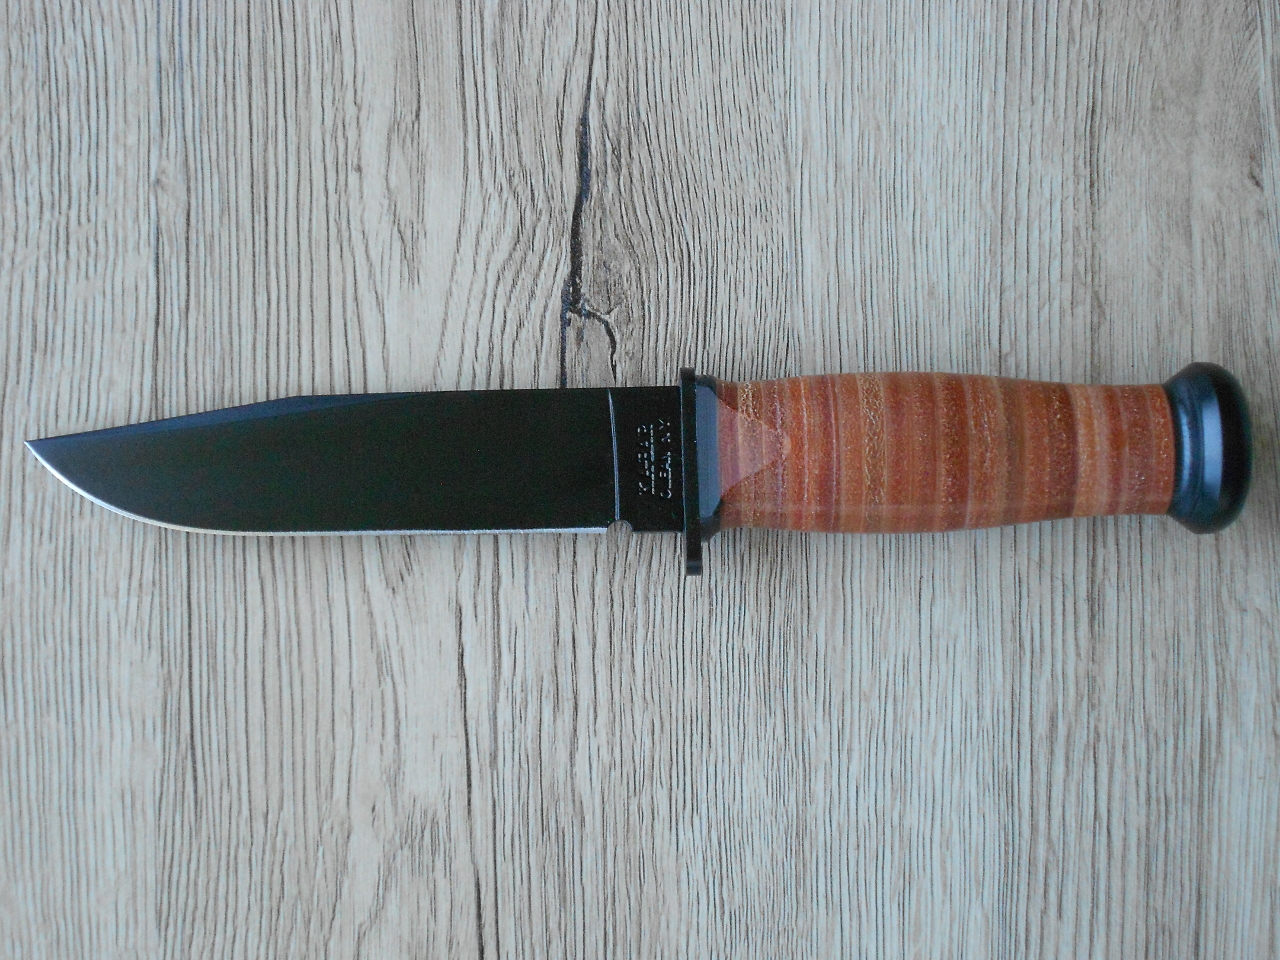 The Ka-Bar US Navy Mark 1 is fairly small with a blade length of 5.125" and an overall length of 9.375". Design is simple, straight, and practical.